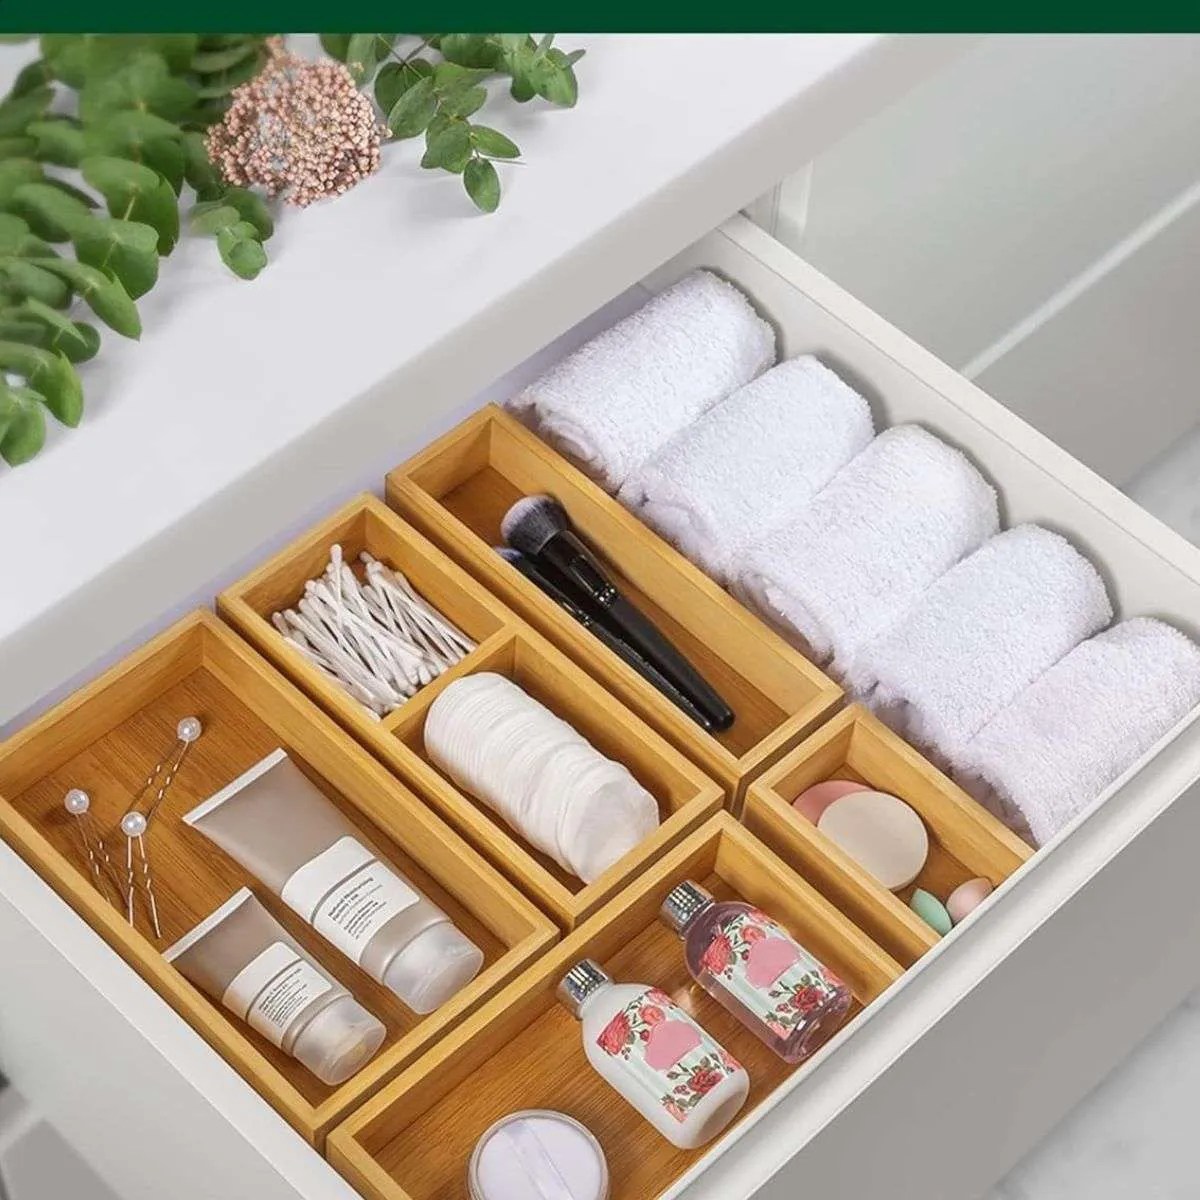 bamboo compartments in a drawer